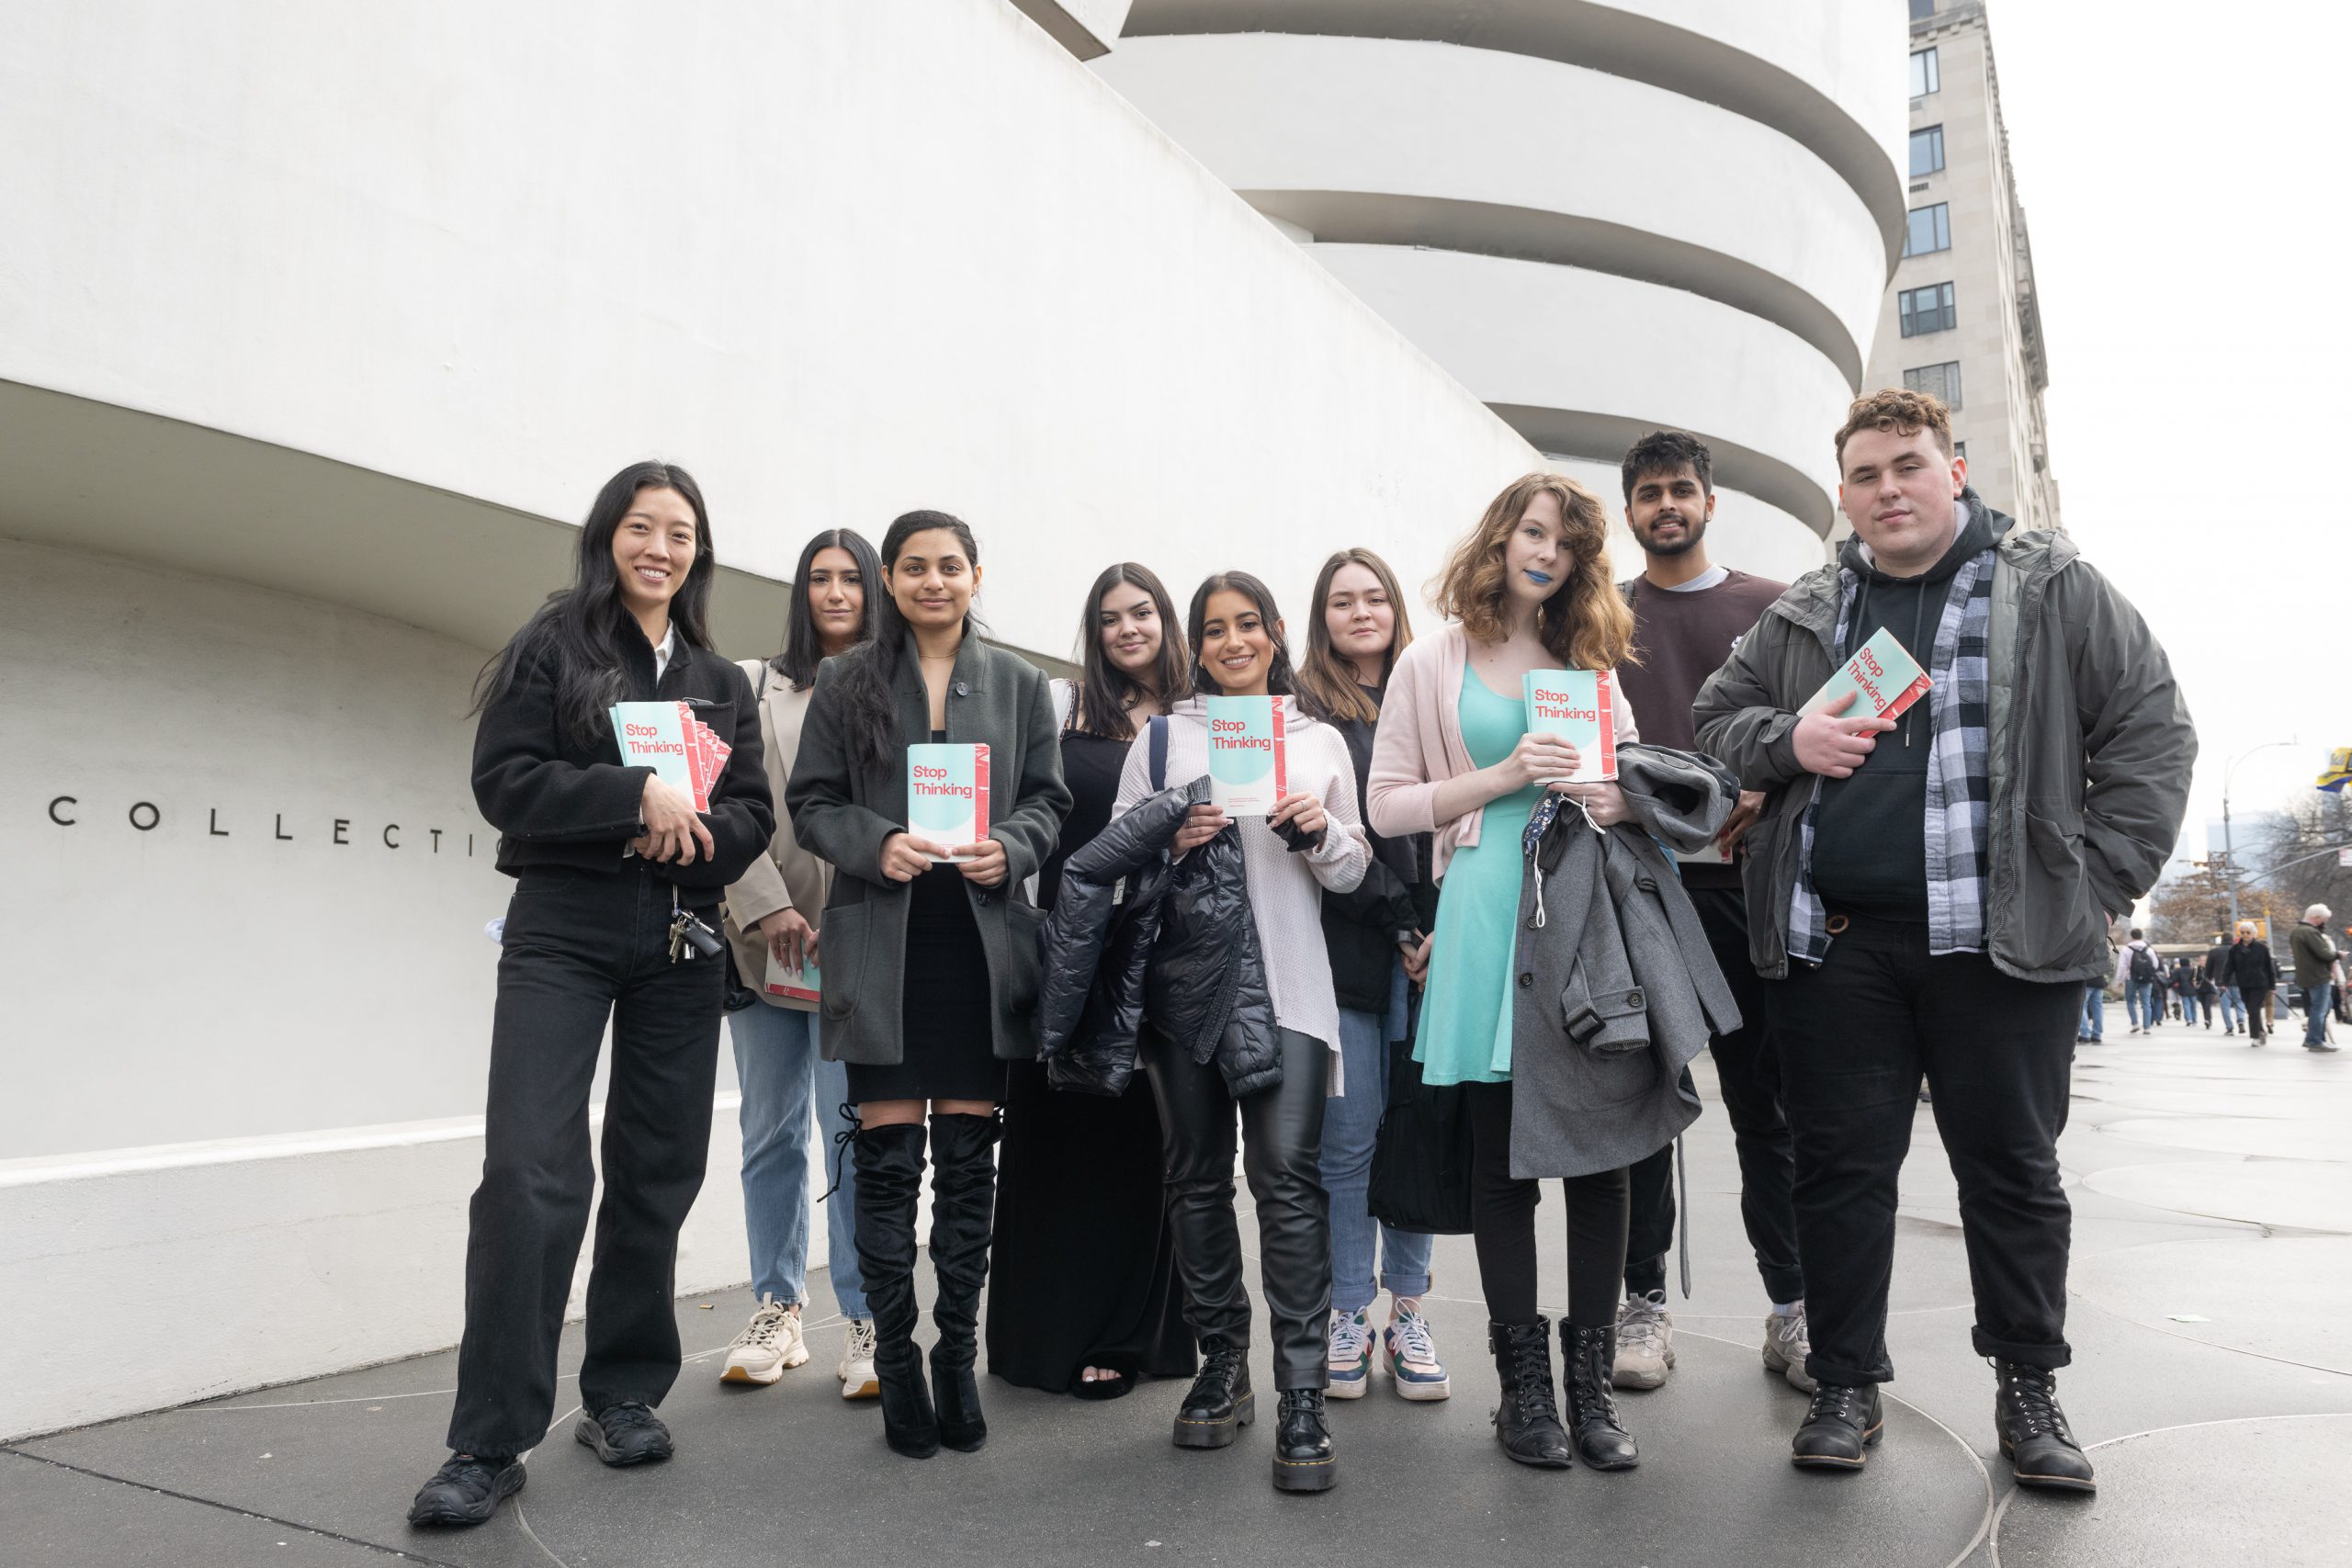 Design Practicum students and professor Mindy Seu stand in front of the Solomon R. Guggenheim Museum holding their designed activity booklets inspired by the artworks on view by Vasily Kandinsky and Jennie C. Jones for the Aye Simon Reading Room